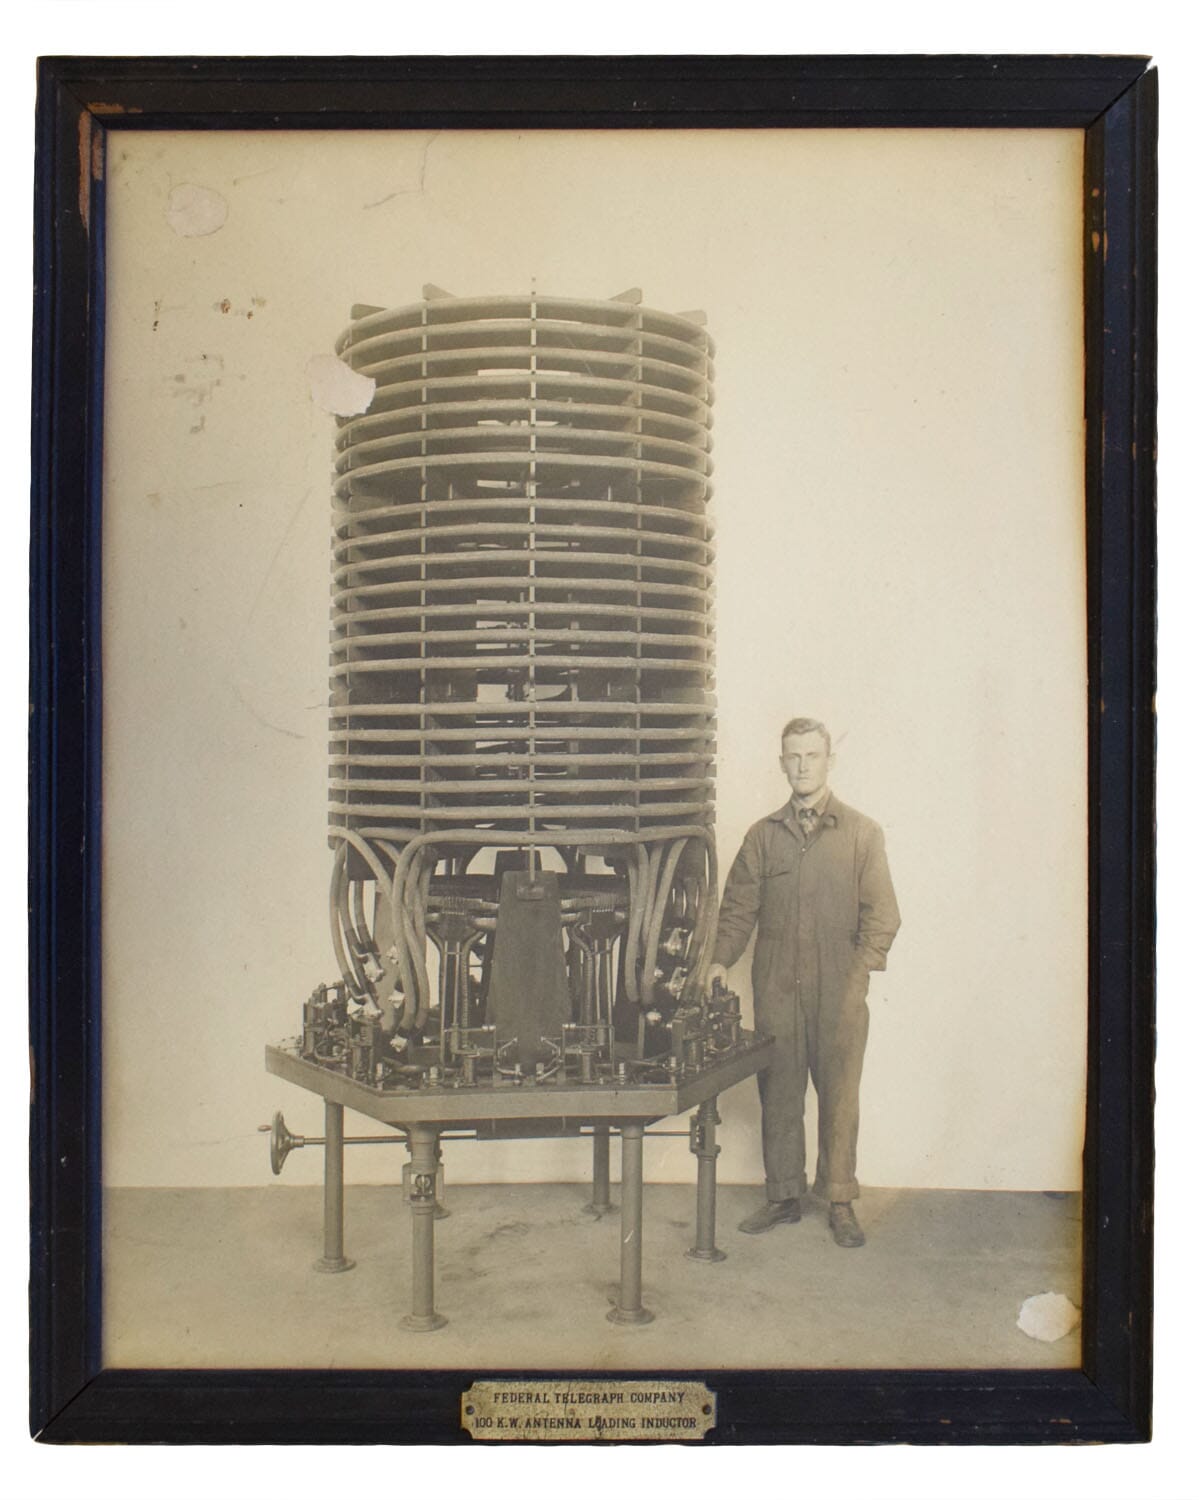 Federal Telegraph Company. 100 K. W. Antenna Loading Inductor. [Caption title].